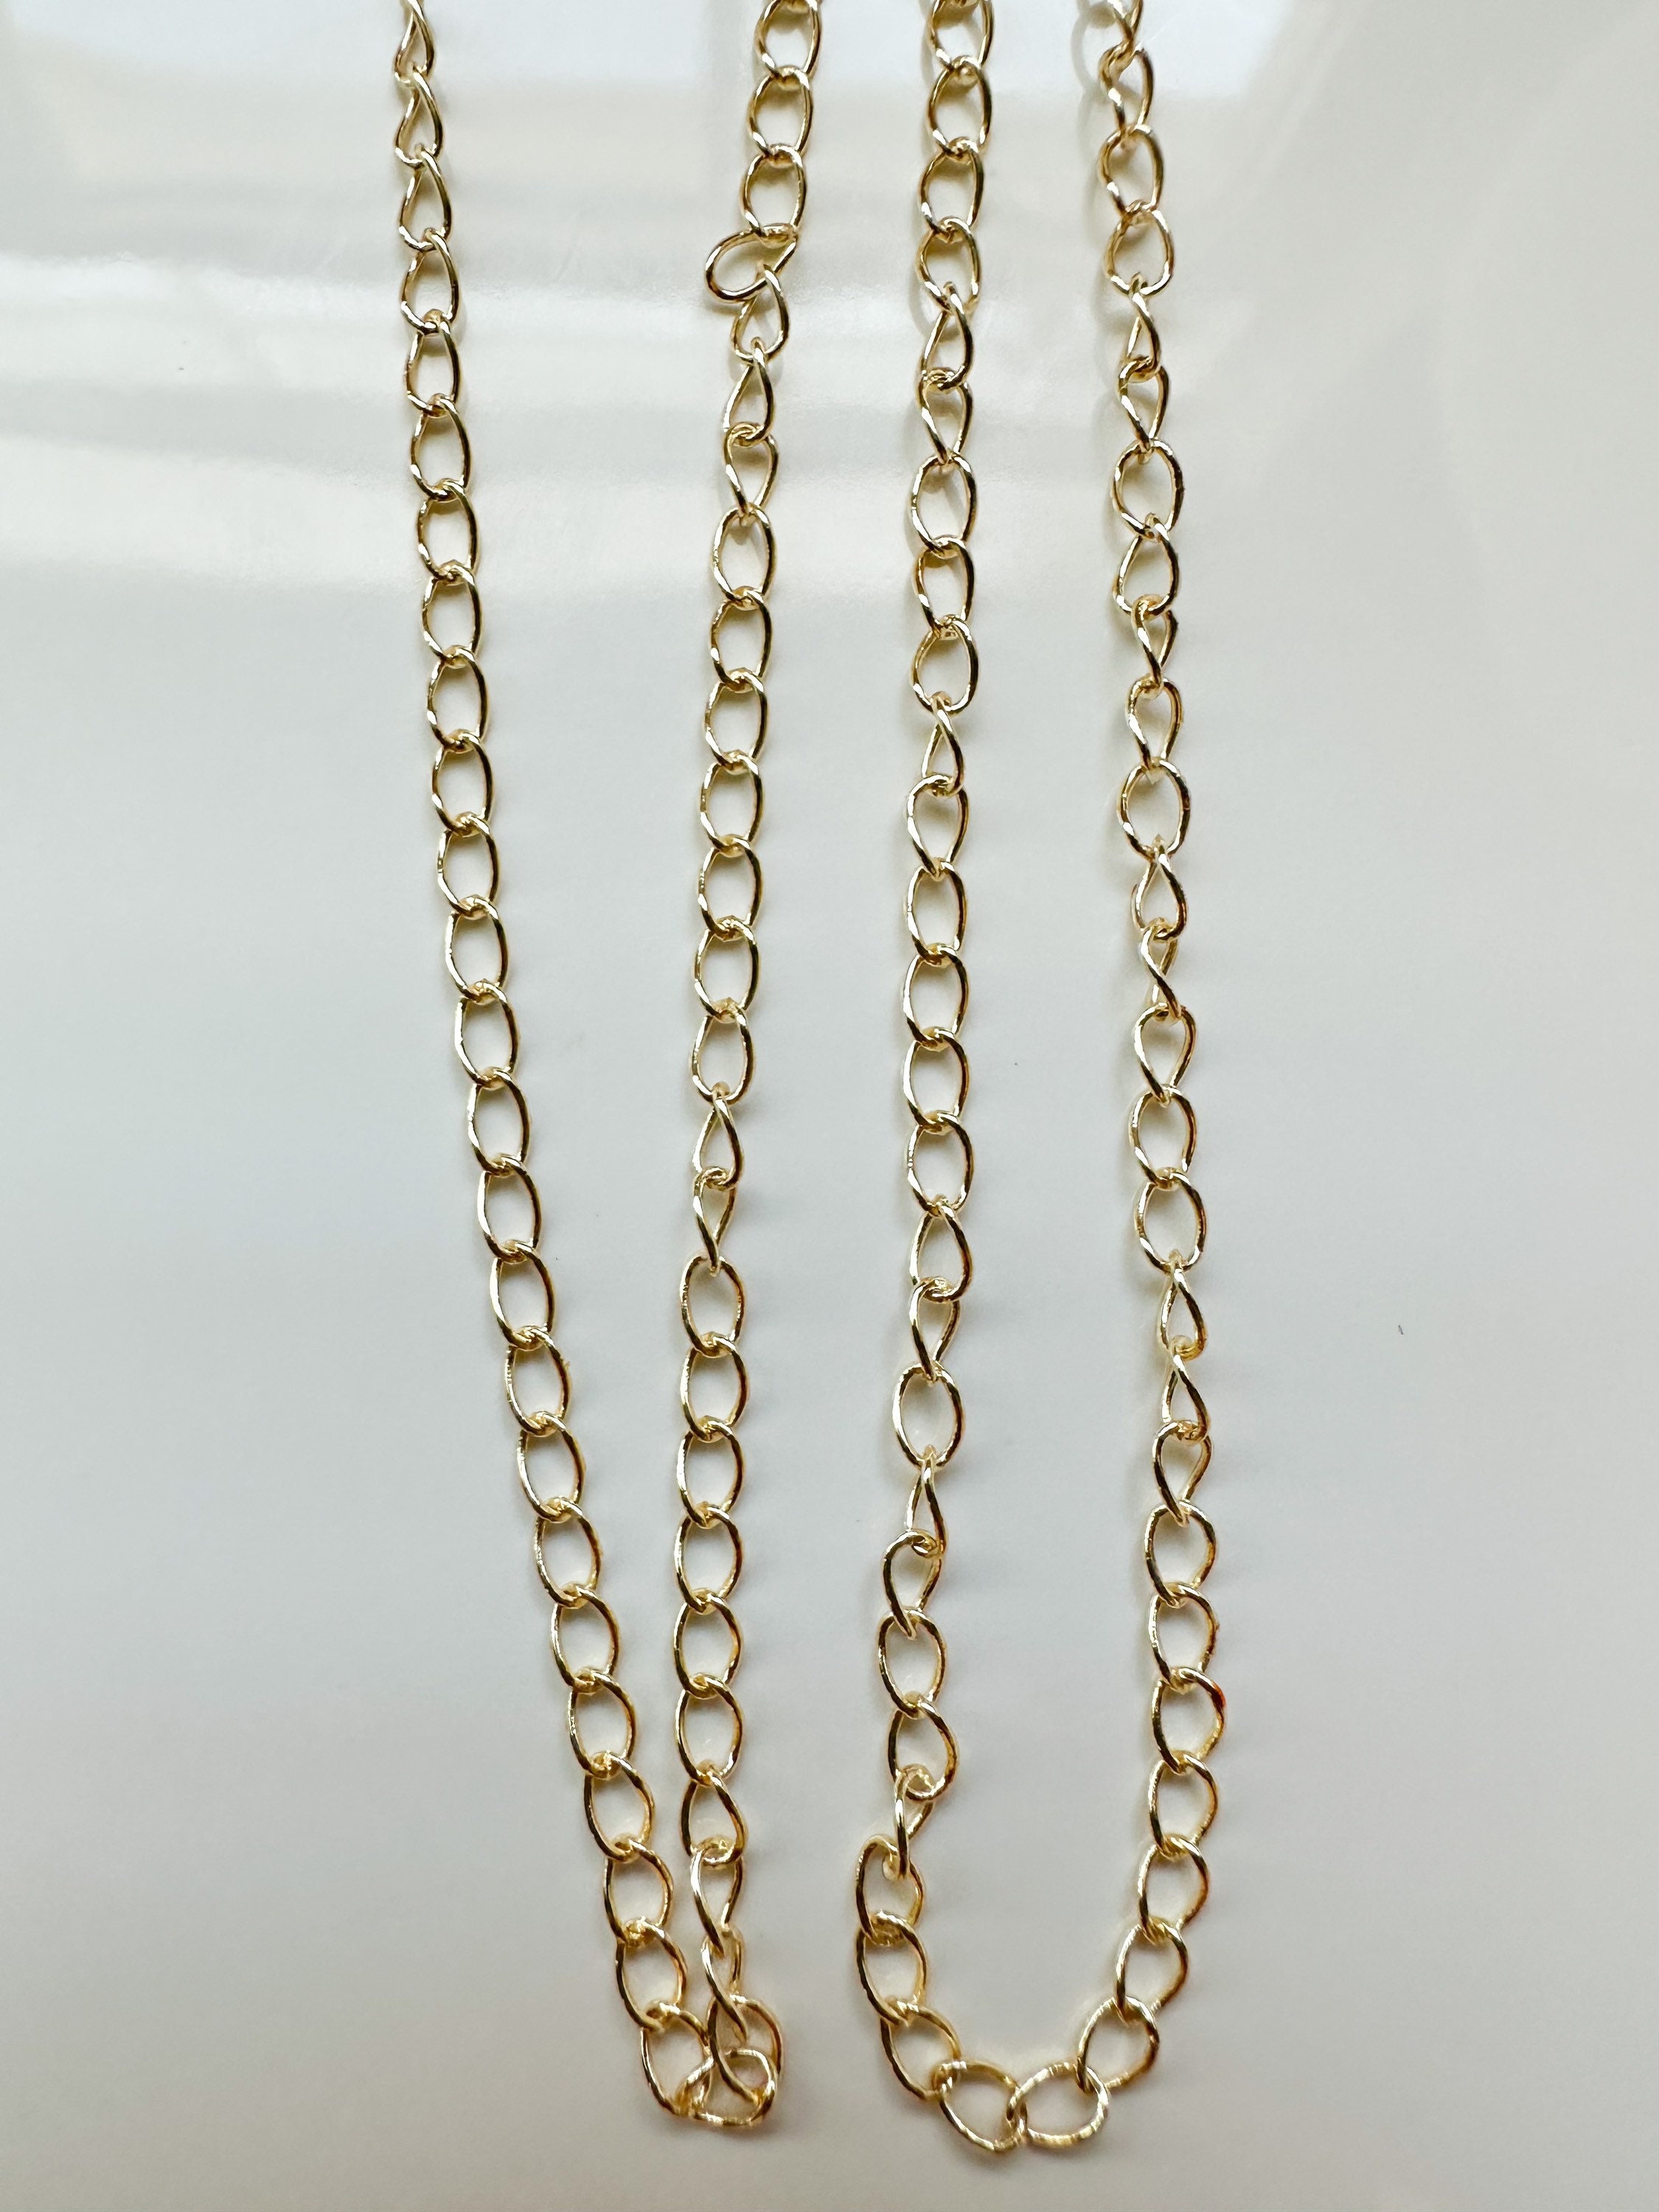 Chains by the Yard, Necklace Chains for Jewelry Making, Necklace Making  Chain, Earring Findings, 14k Gold Plated Chain, Round Disc 